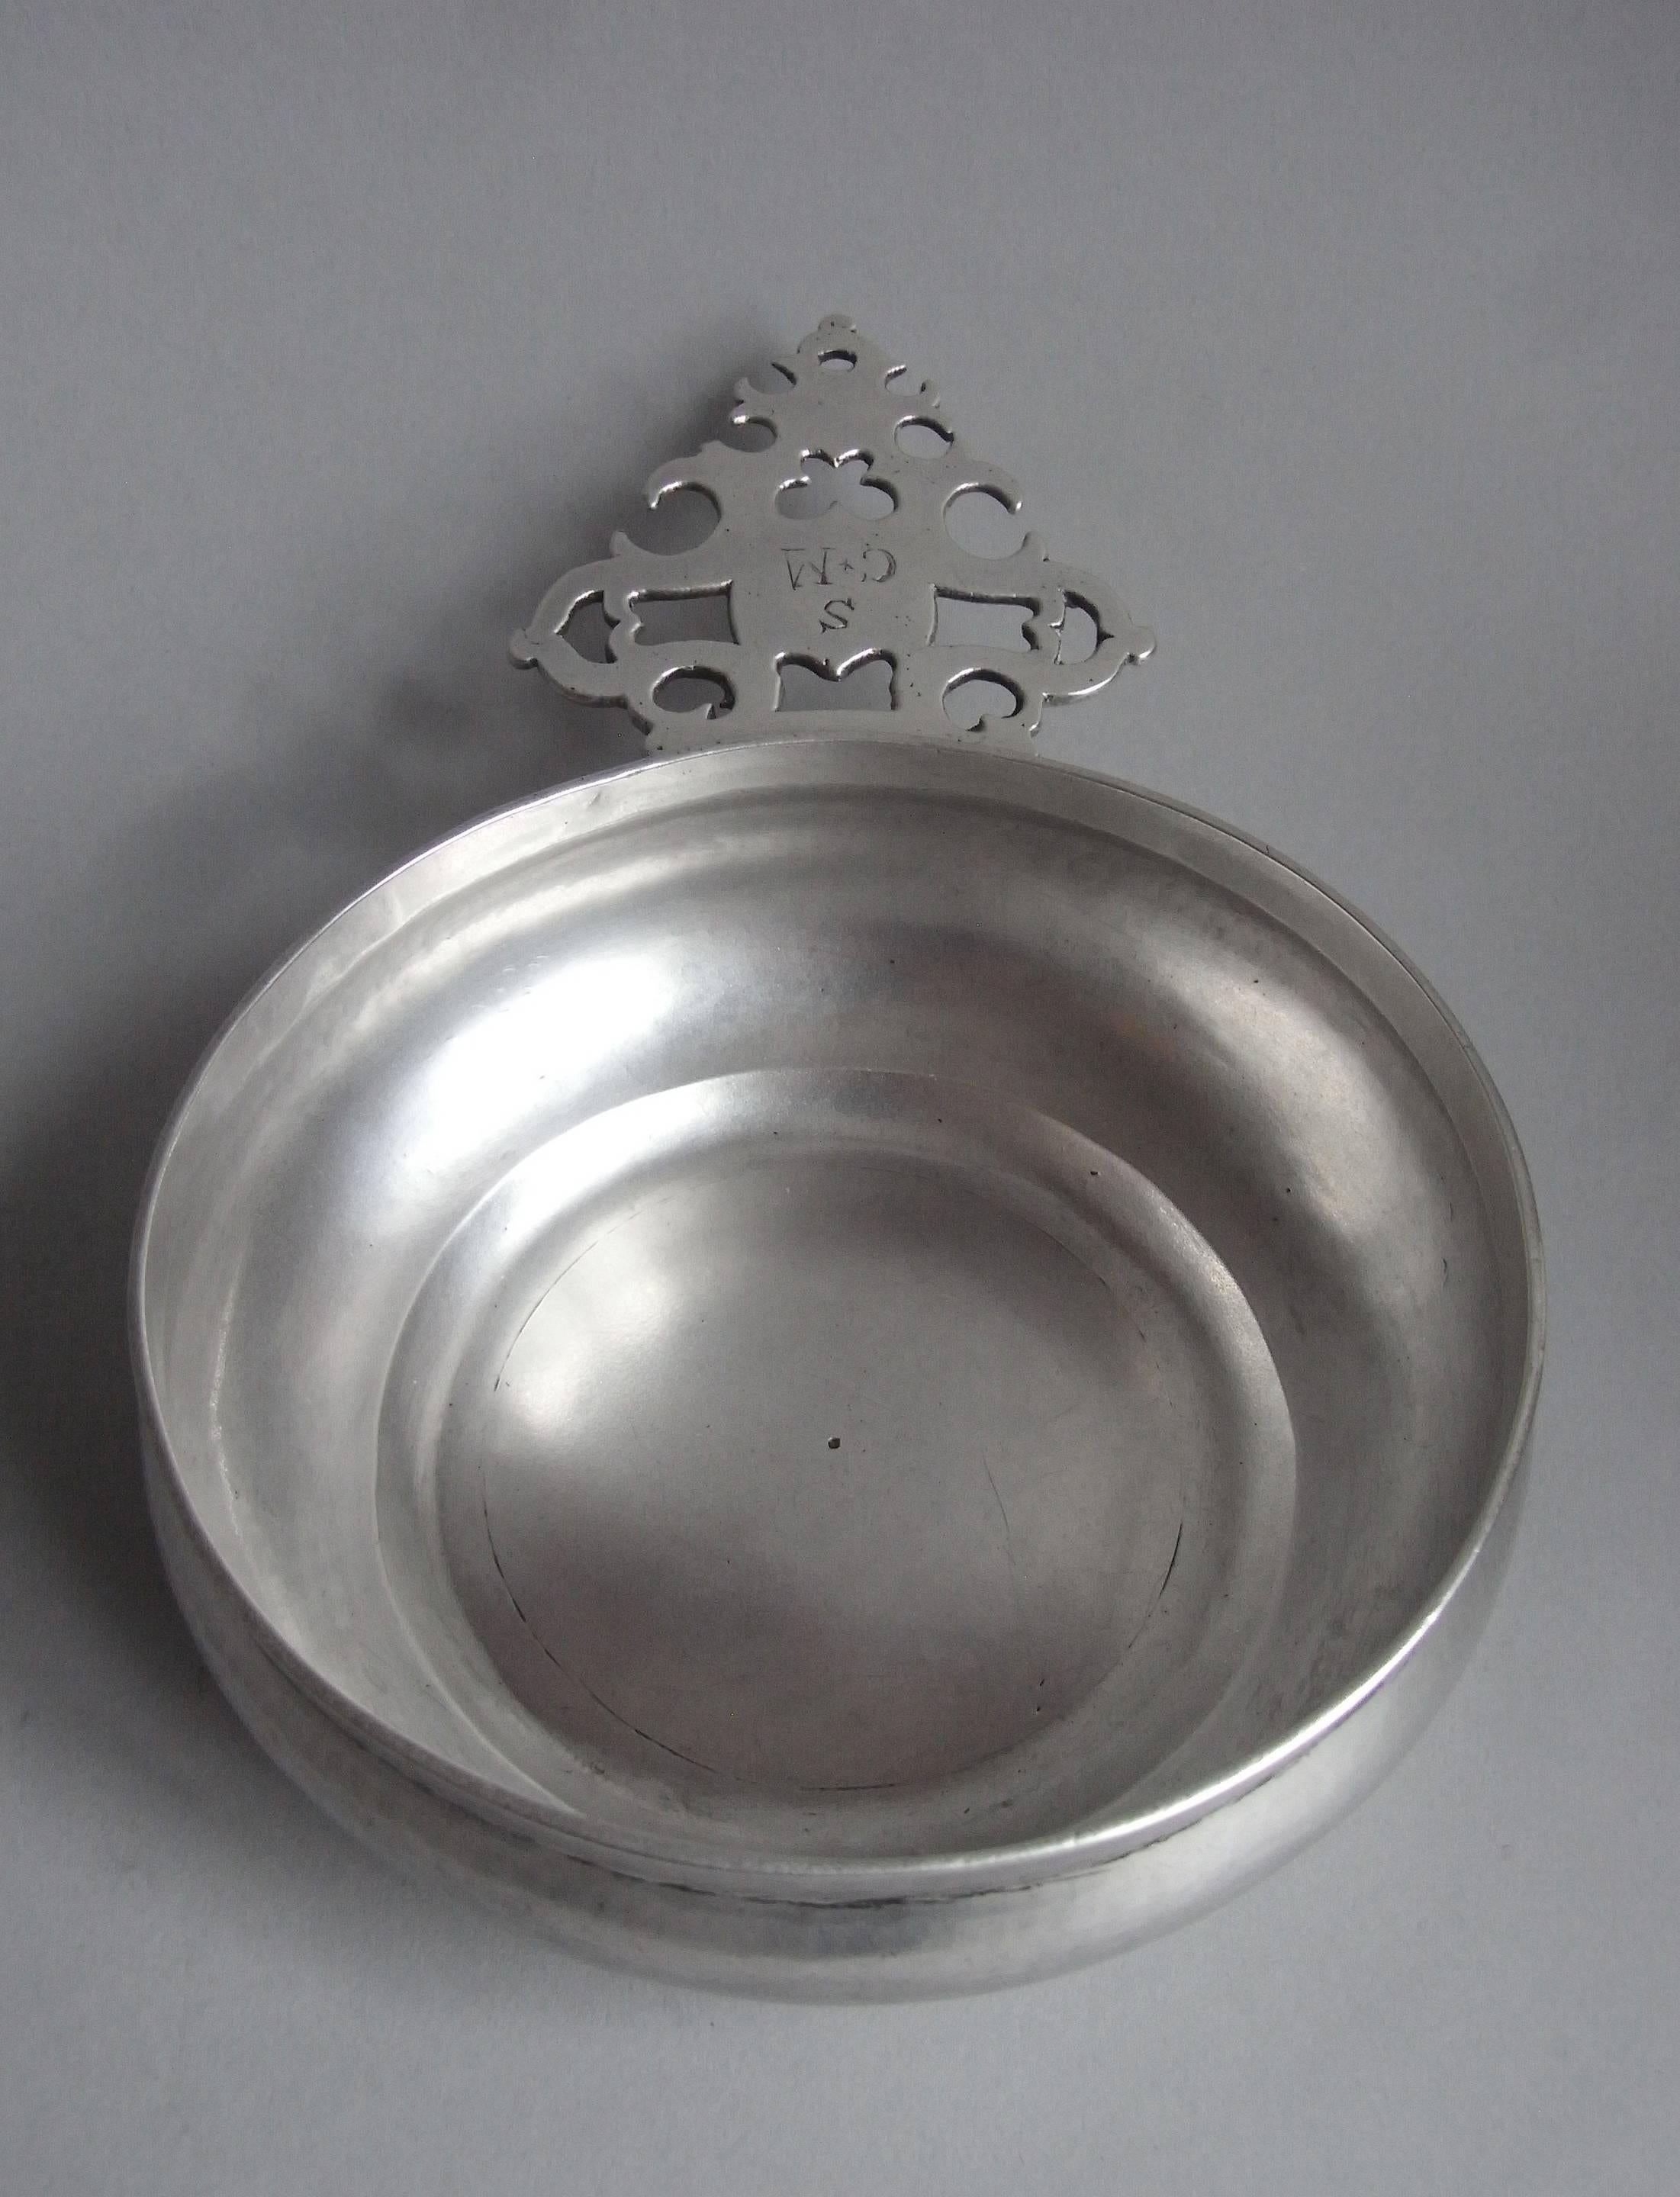 These side handled bowls were almost certainly used as eating vessels.  This exceptional example is made in the higher Britannia Standard grade of silver. The bowl has circular baluster sides which raise to a straight rim. The cast handle is shaped